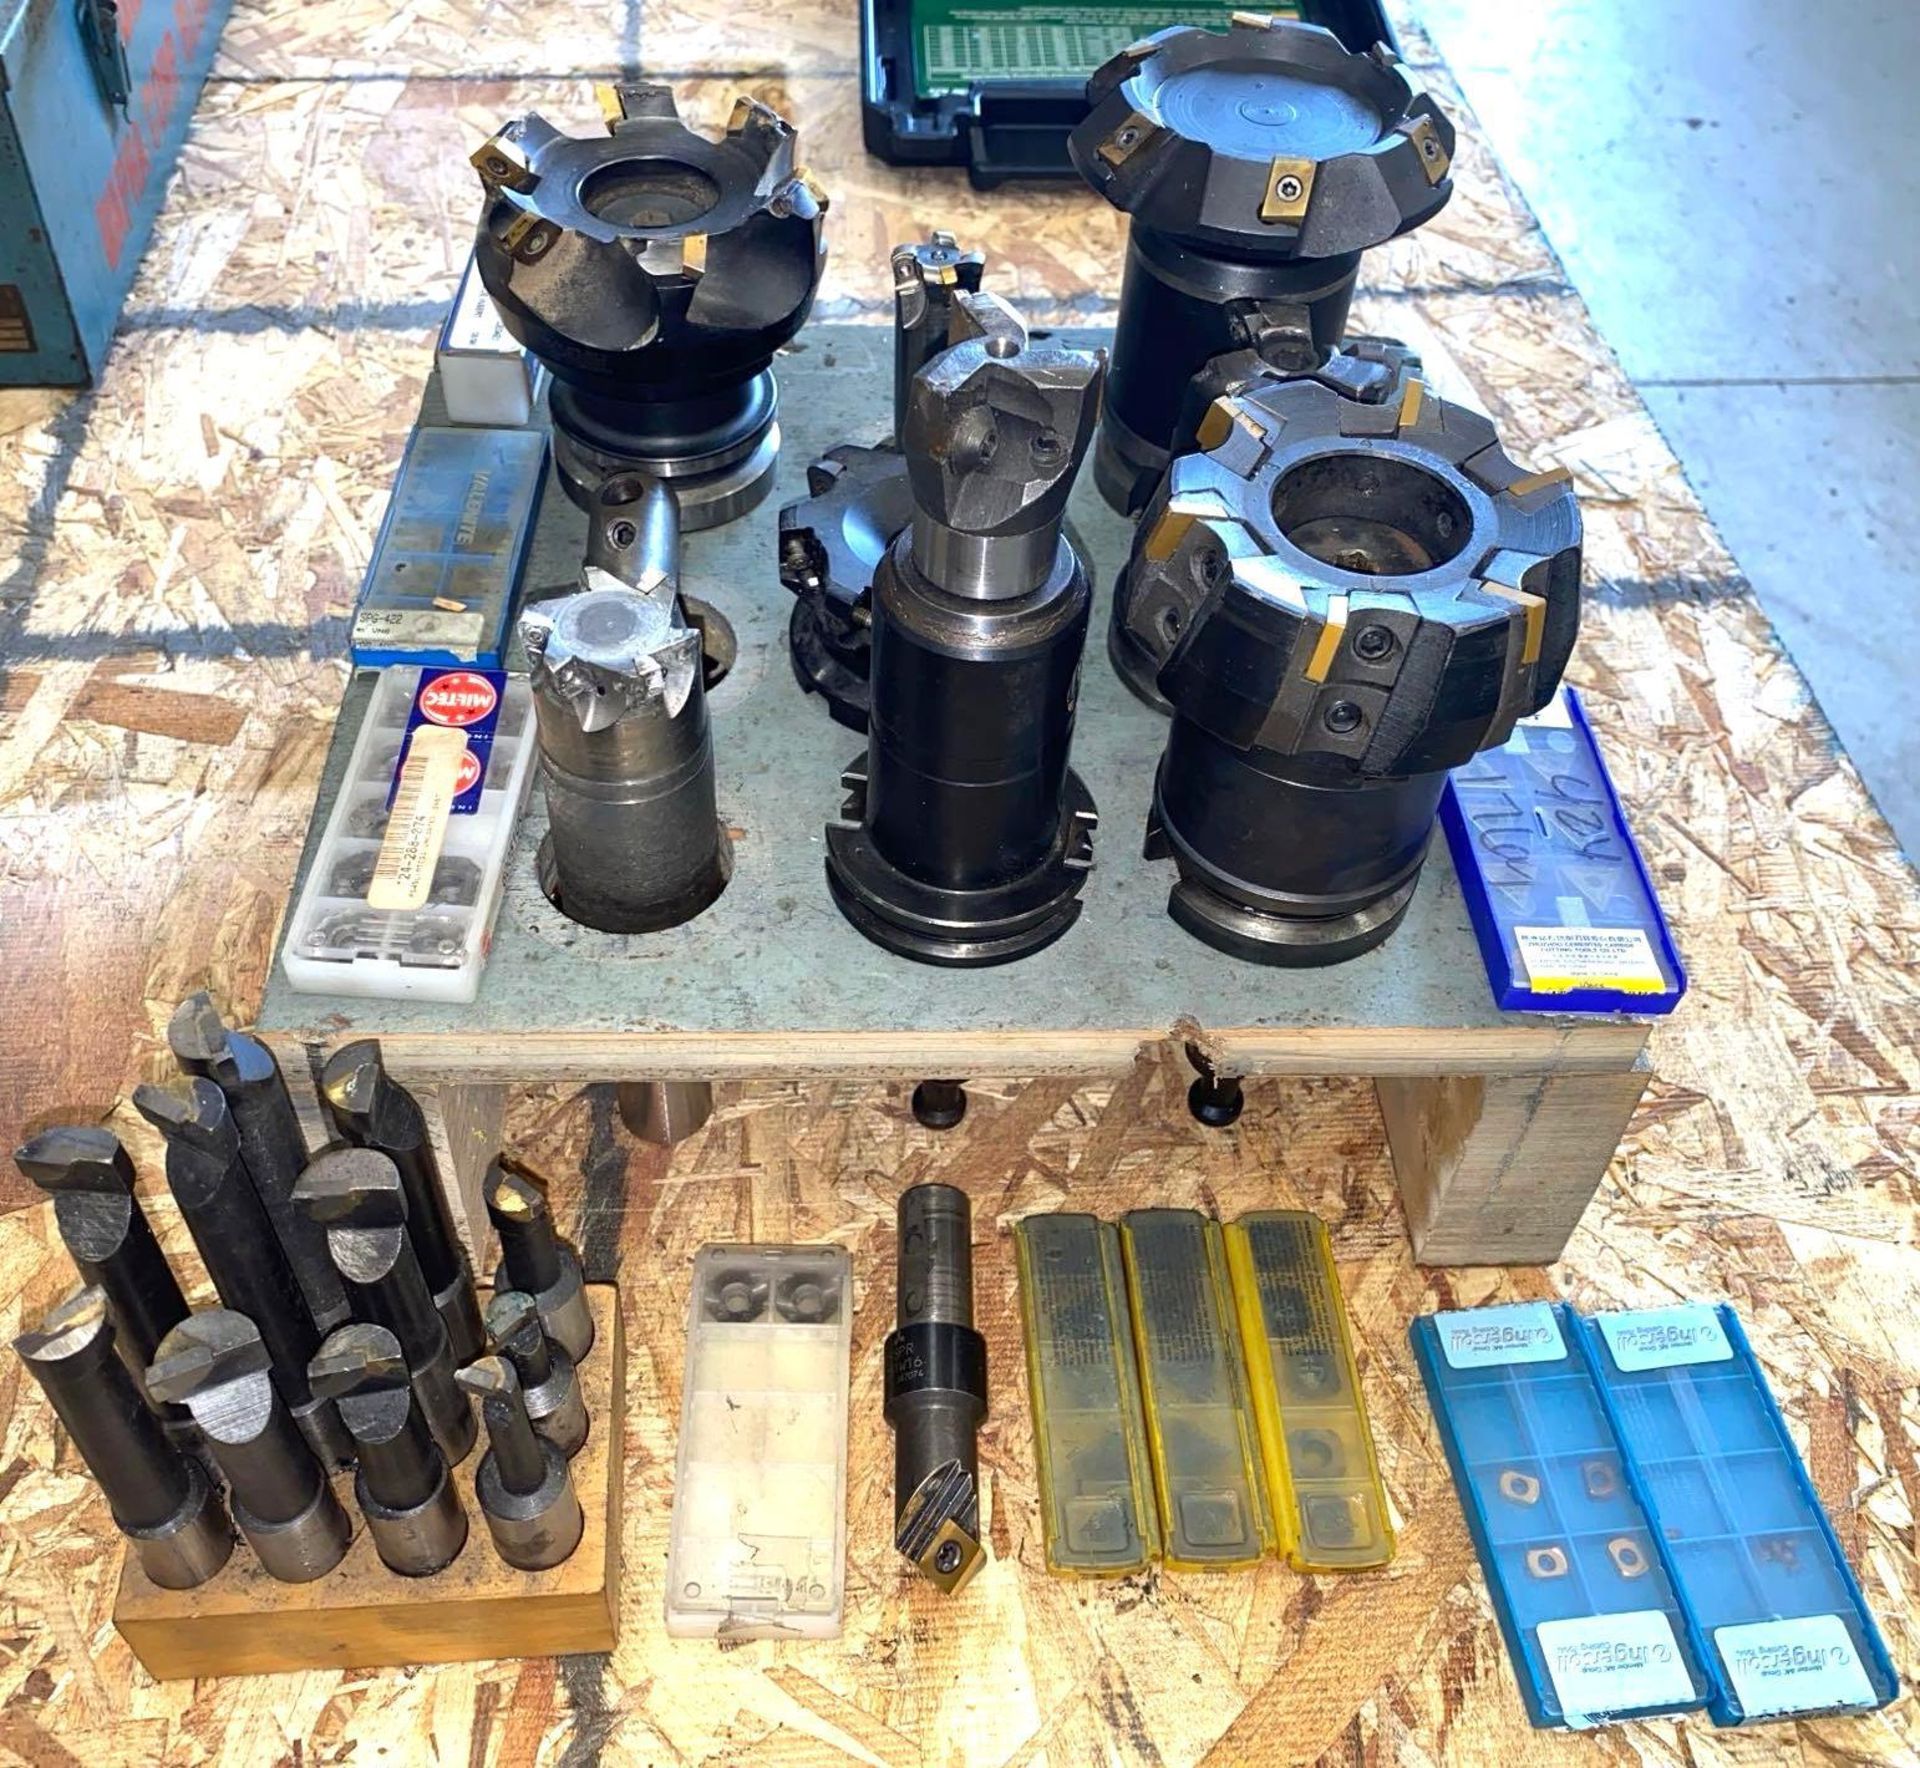 Lot of Carbide Insert Milling Cutters, Boring Bars, Carbide Inserts